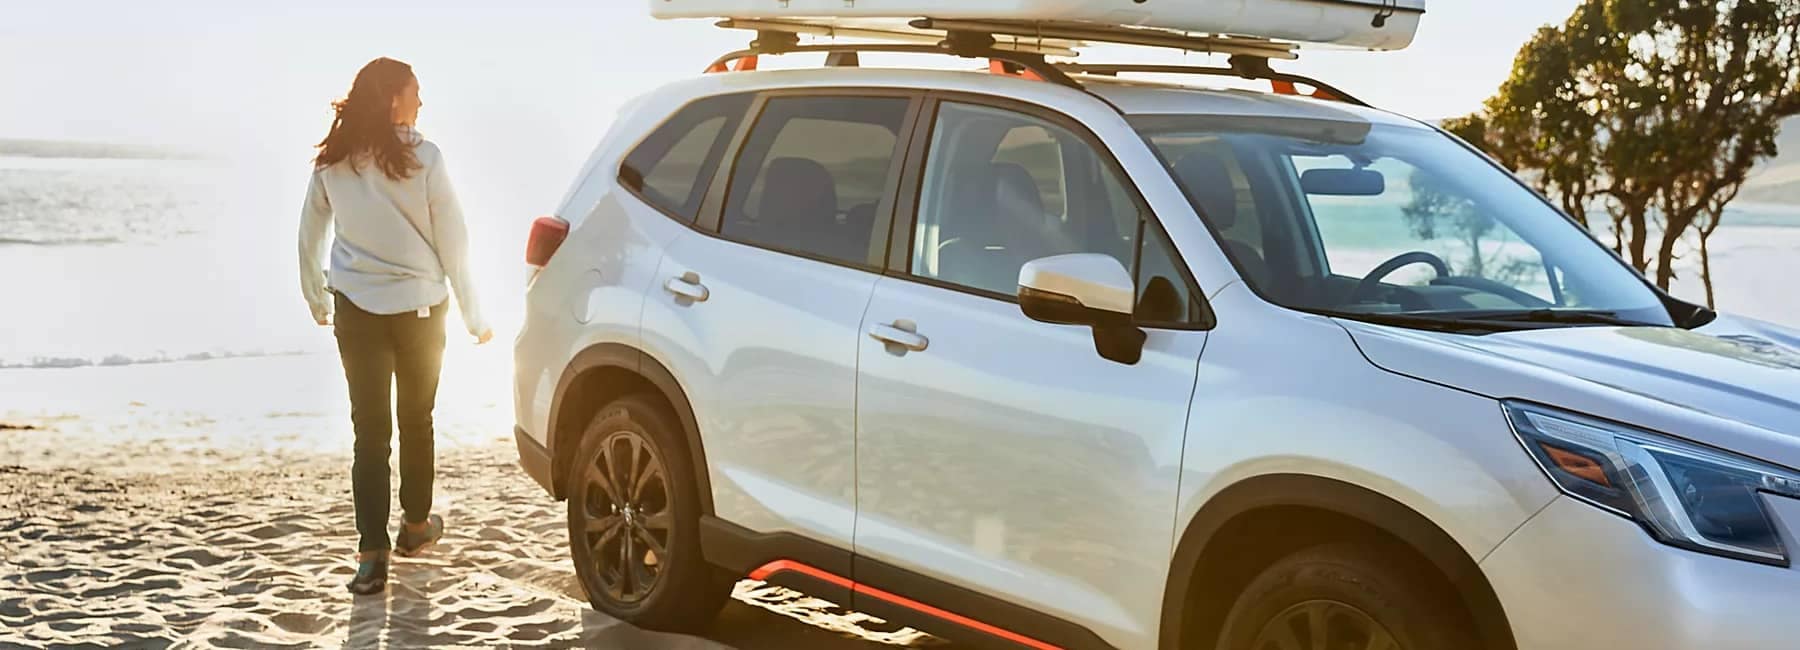 2022 Subaru Forester side view parked on beach